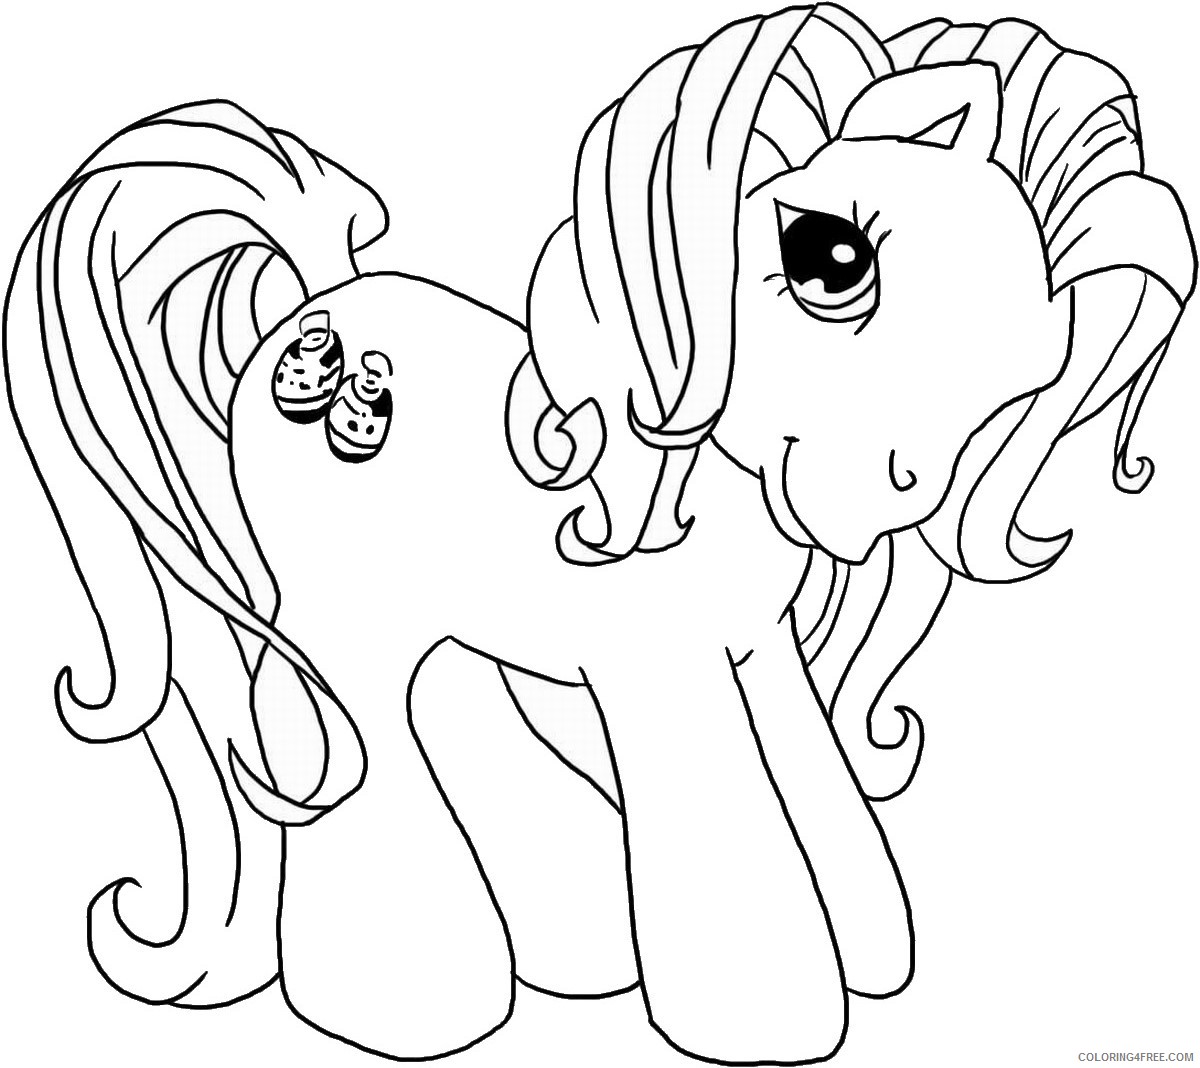 My Little Pony Coloring Pages Cartoons my little pony 5 Printable 2020 4473 Coloring4free